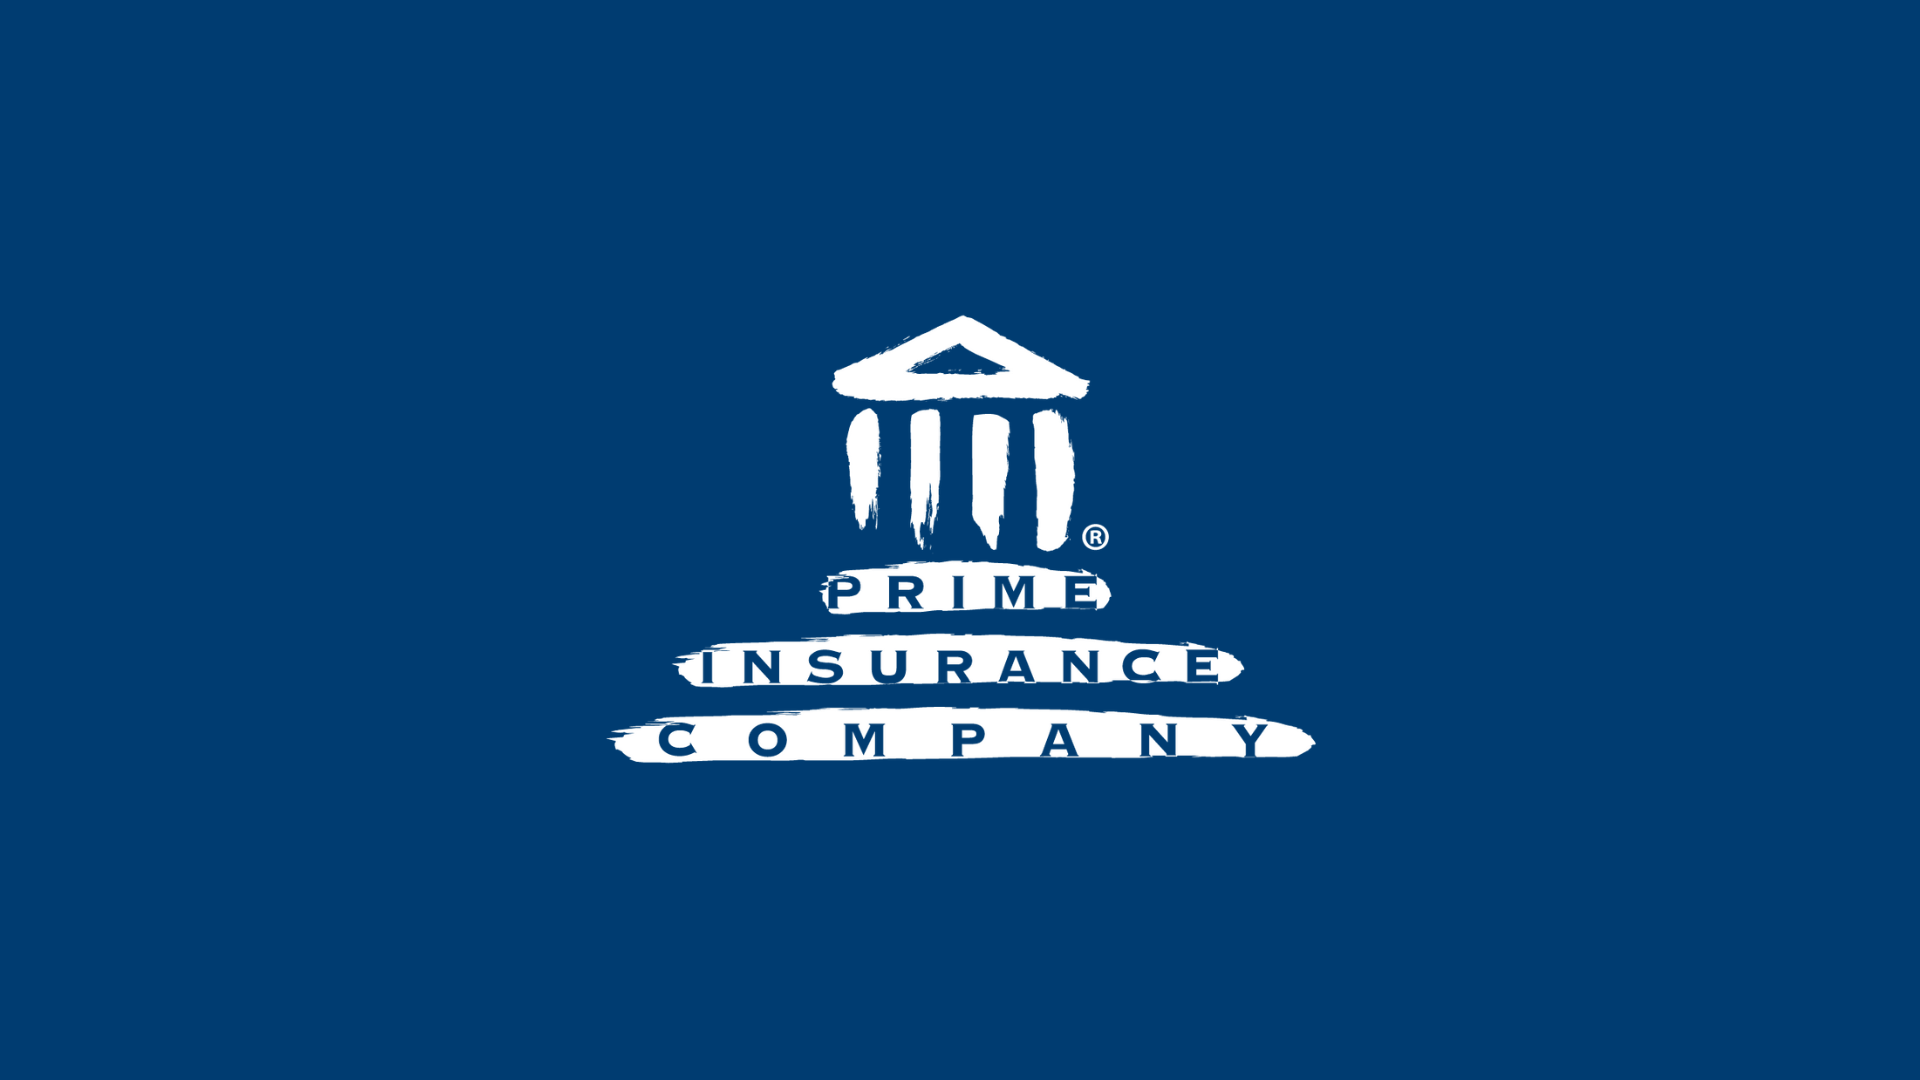 Prime Insurance Company Prevails in Case Against the State of Mississippi regarding Hurricane Katrina